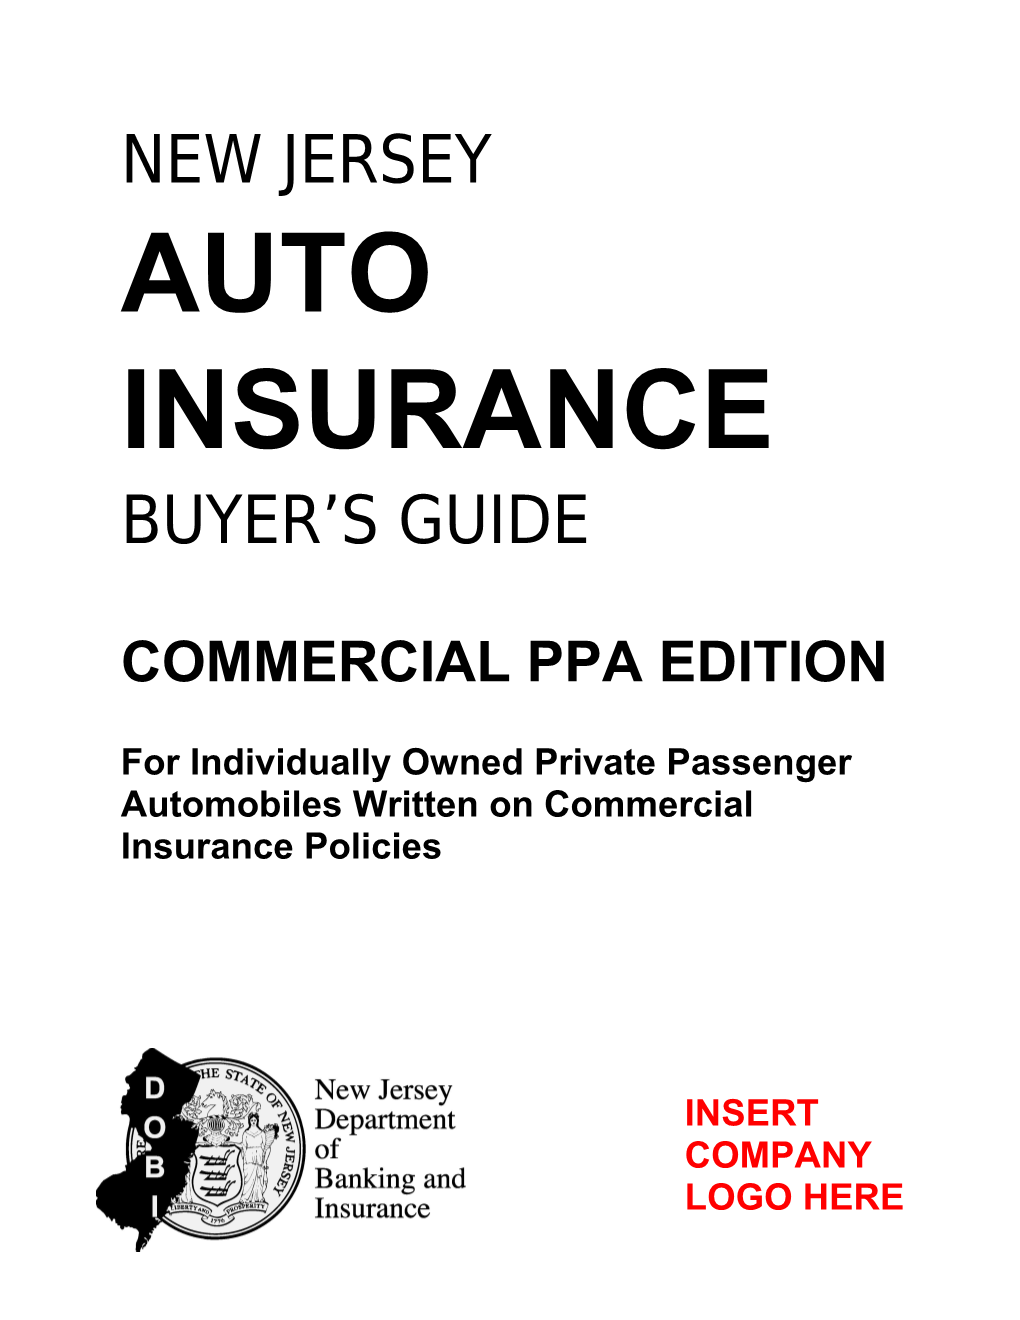 For Individually Owned Private Passenger Automobiles Written on Commercial Insurance Policies